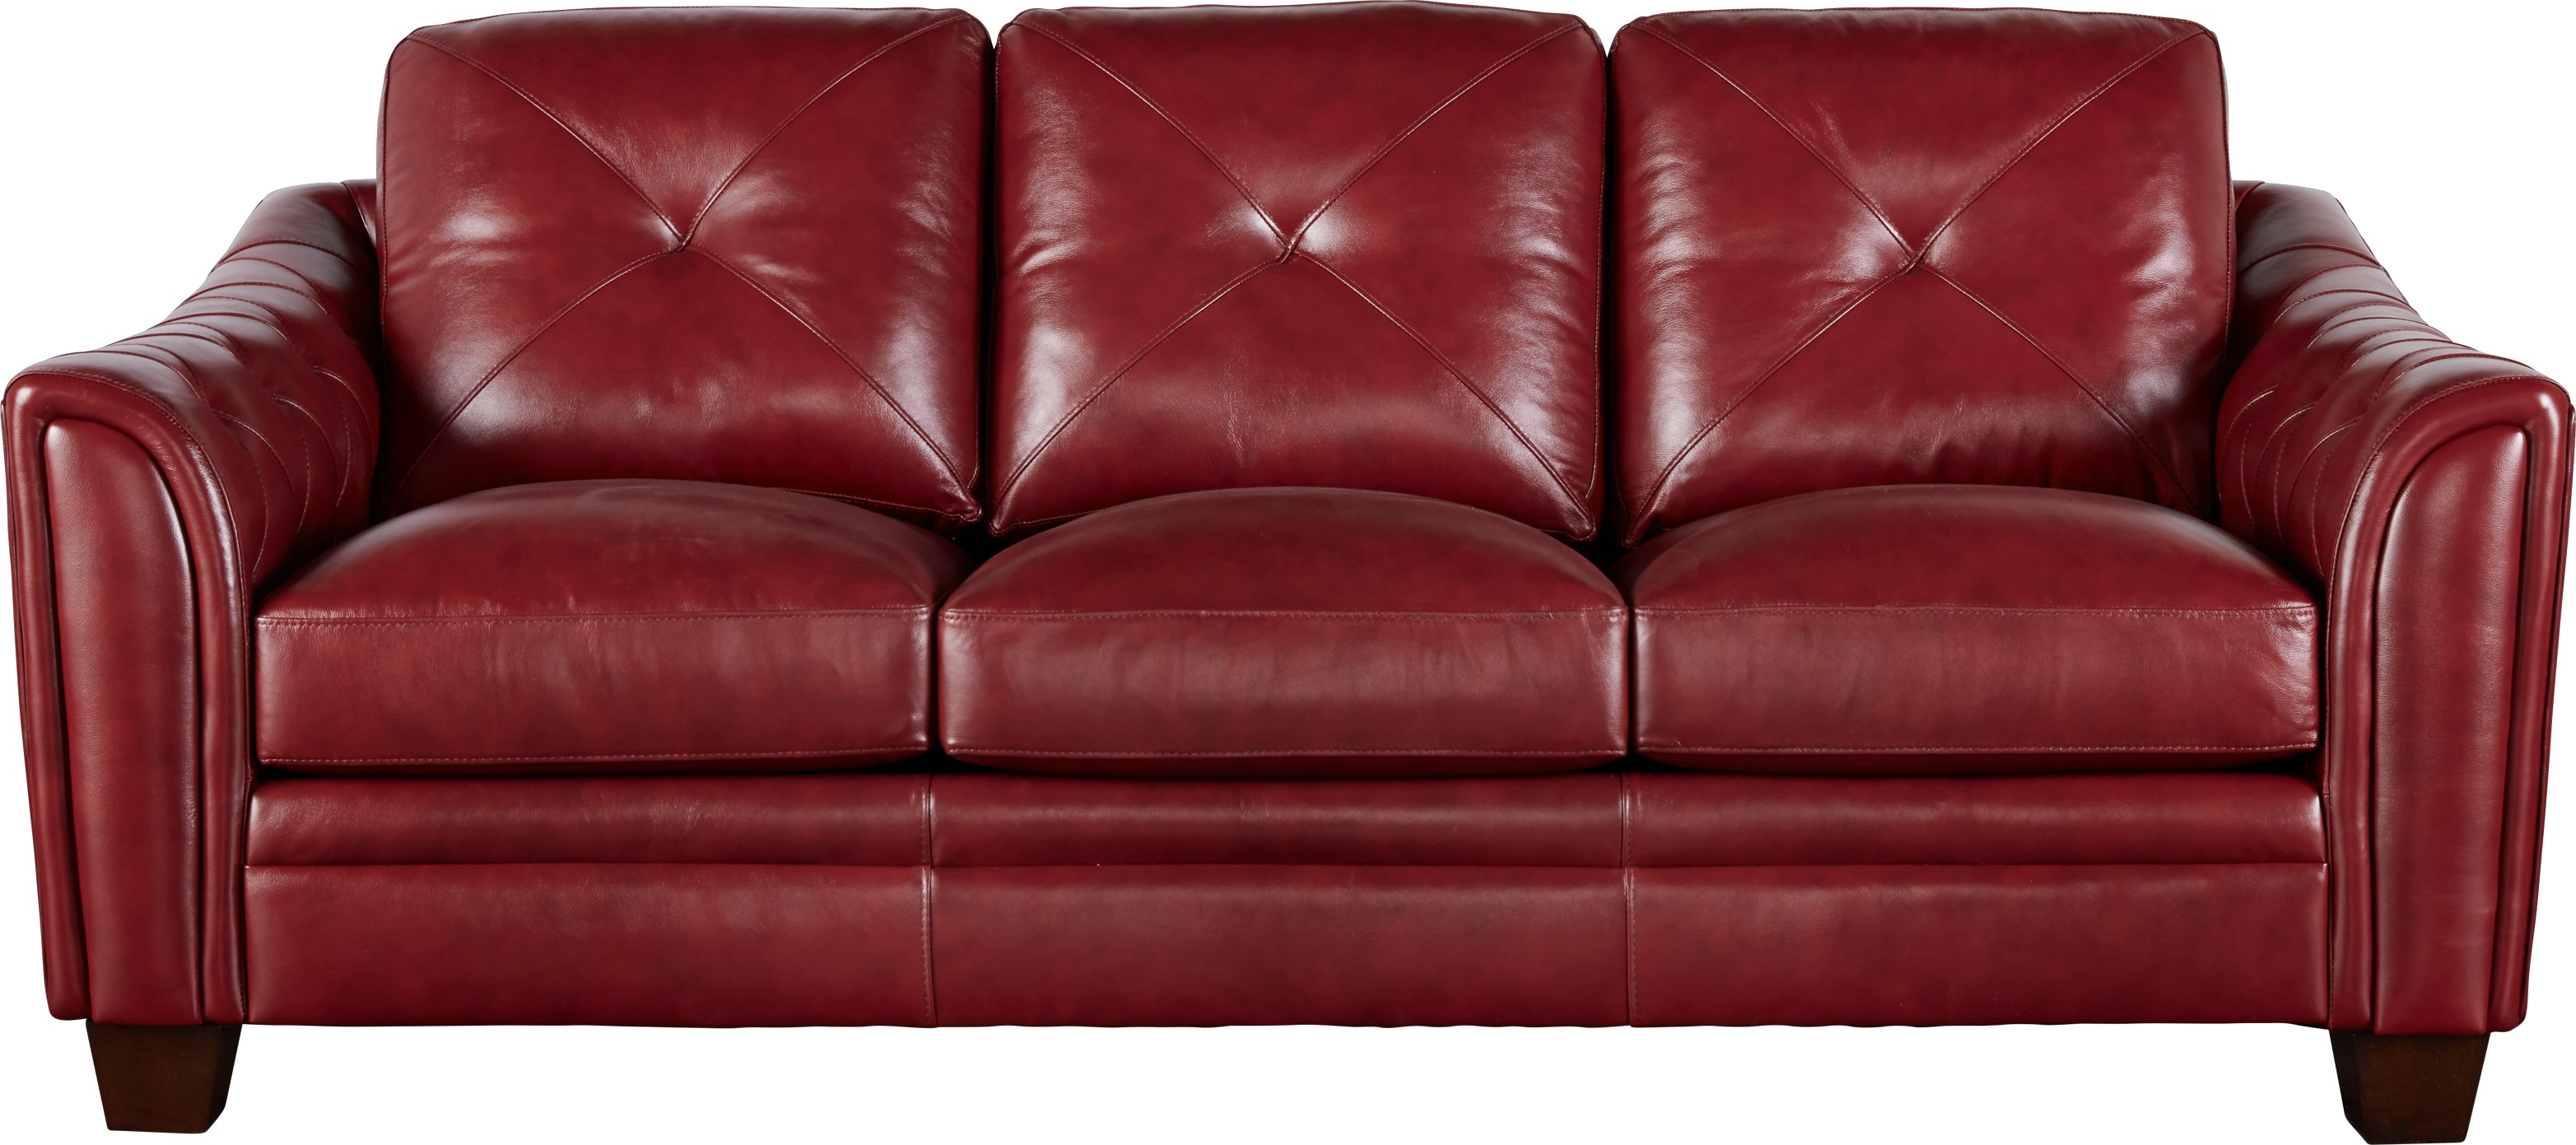 red leather sofa used in fife